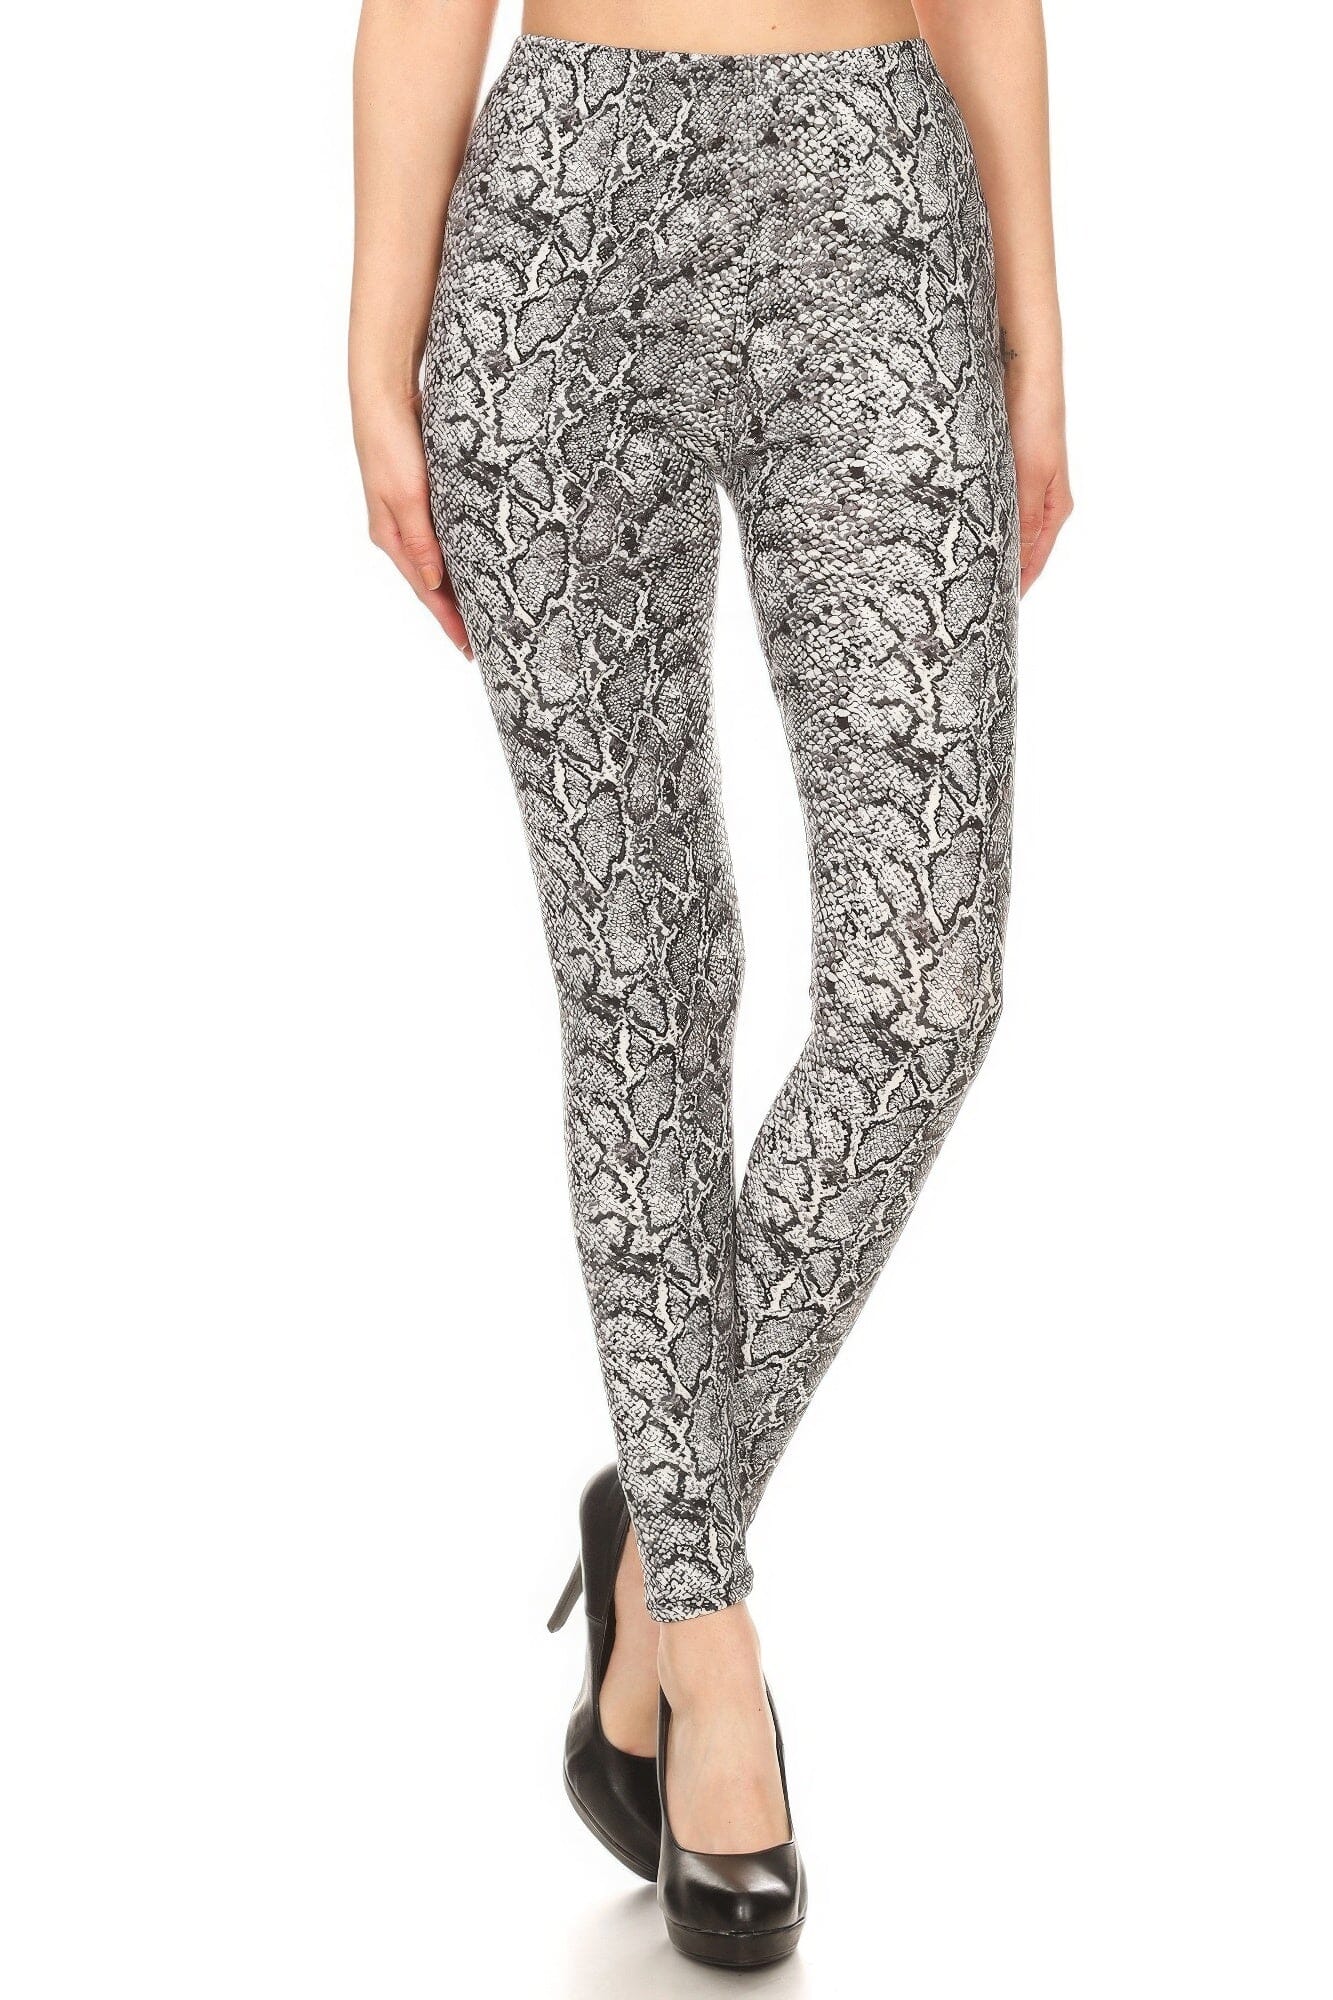 Snakeskin Print In A Fitted Style With An Elastic Waistband Full Length High Waisted Leggings Pants jehouze 